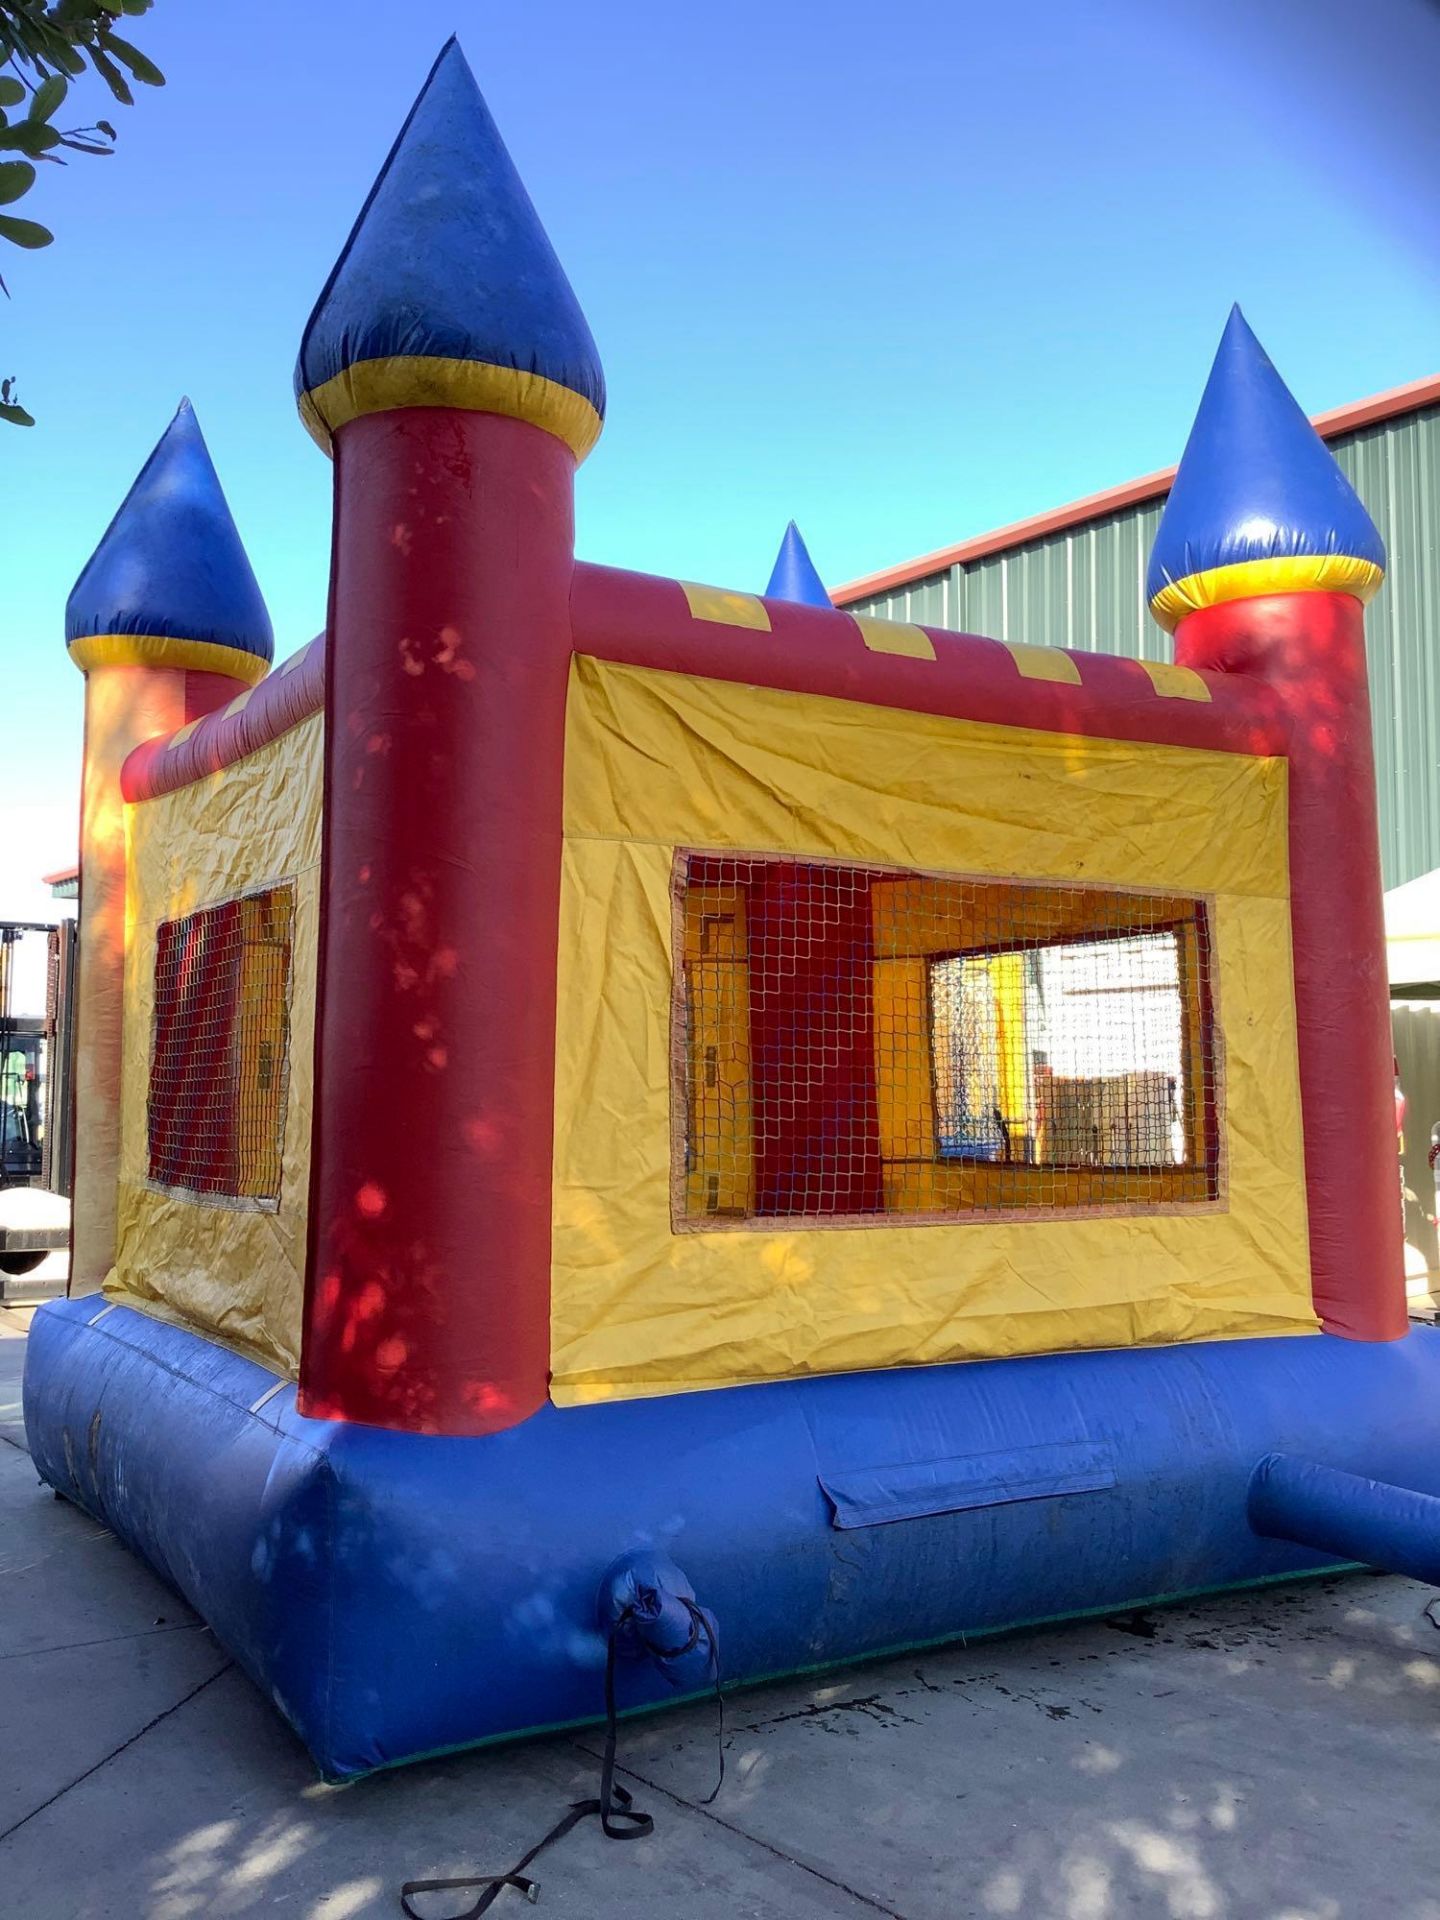 JUMPION CASTLE BOUNCE HOUSE, APPROX 13’ x 13’ - Image 6 of 7